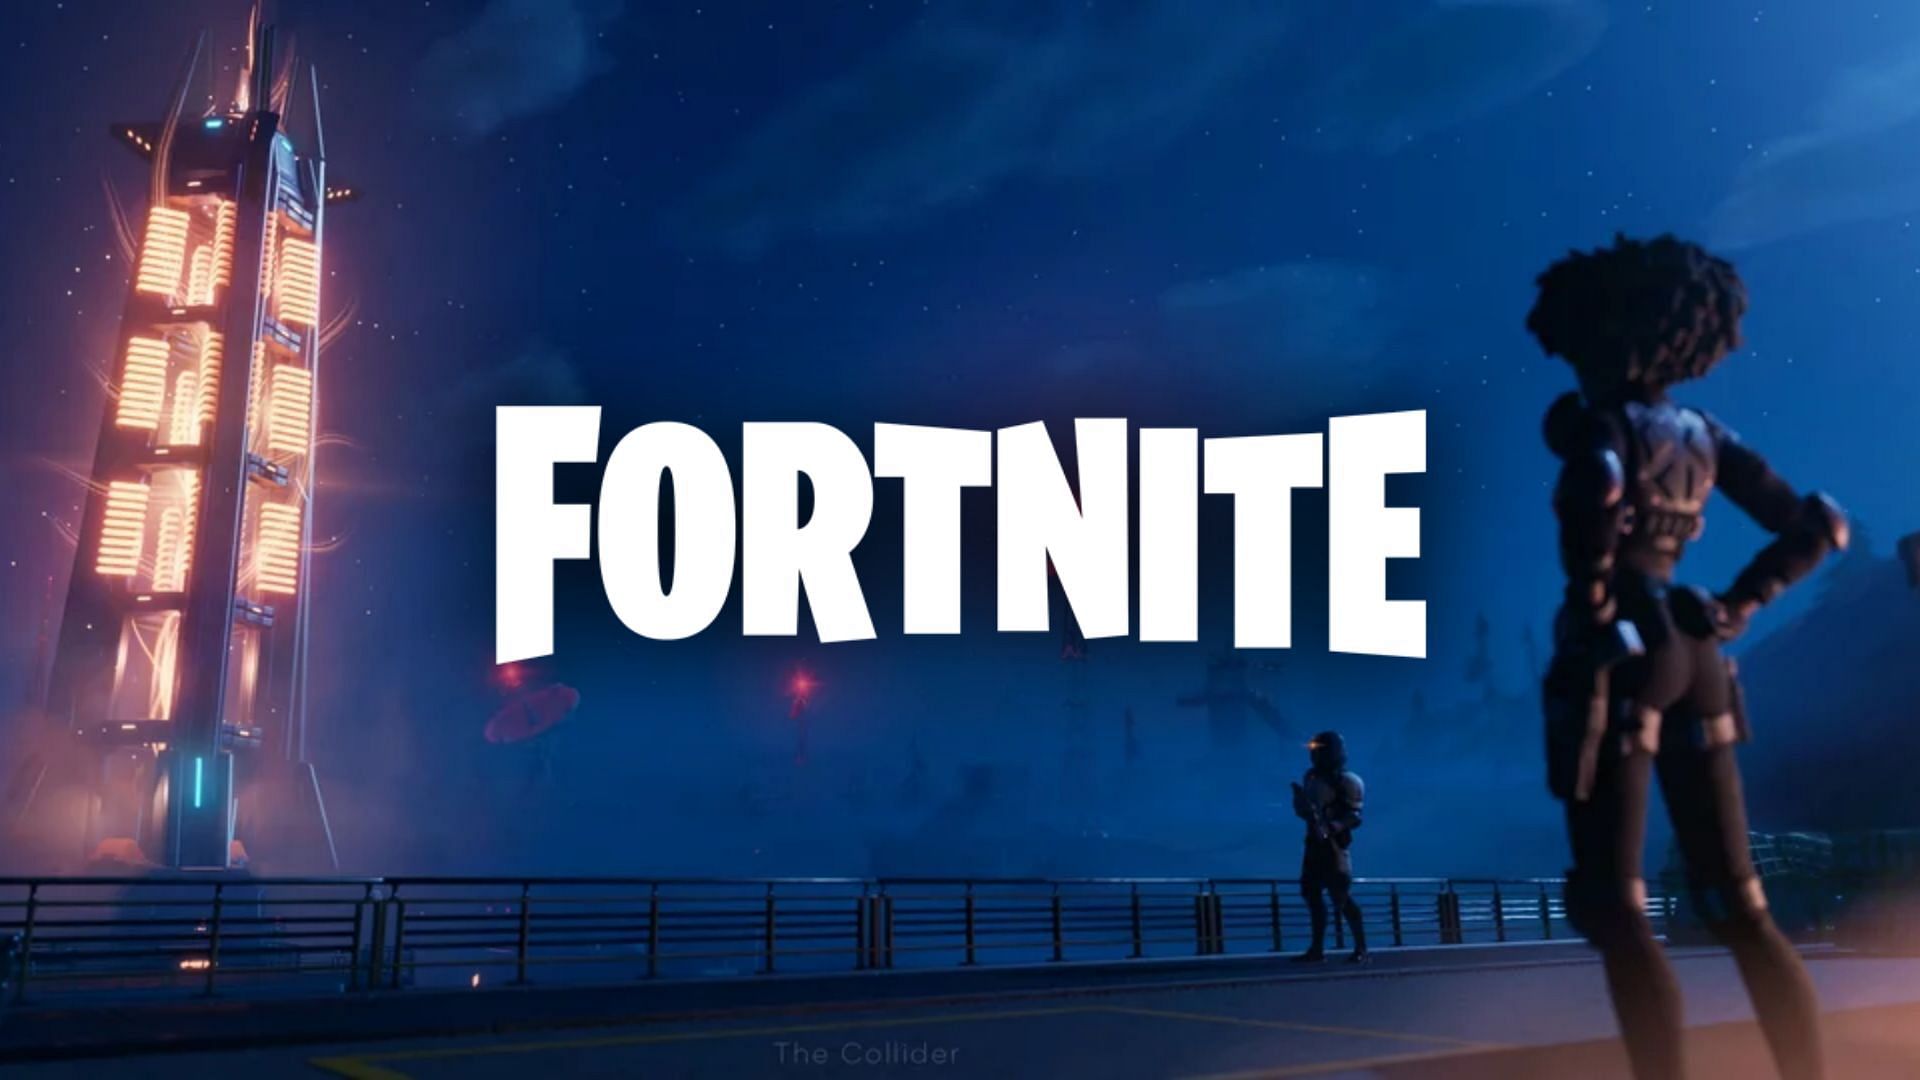 Only a few hours remain until the brand-new Fortnite Chapter 3 Season 3 comes out. Players from all over the world are looking forward to the upcoming live event. which would be a great way to end the current season. At the same time, they want to know when the next season will start and when they can play the event.